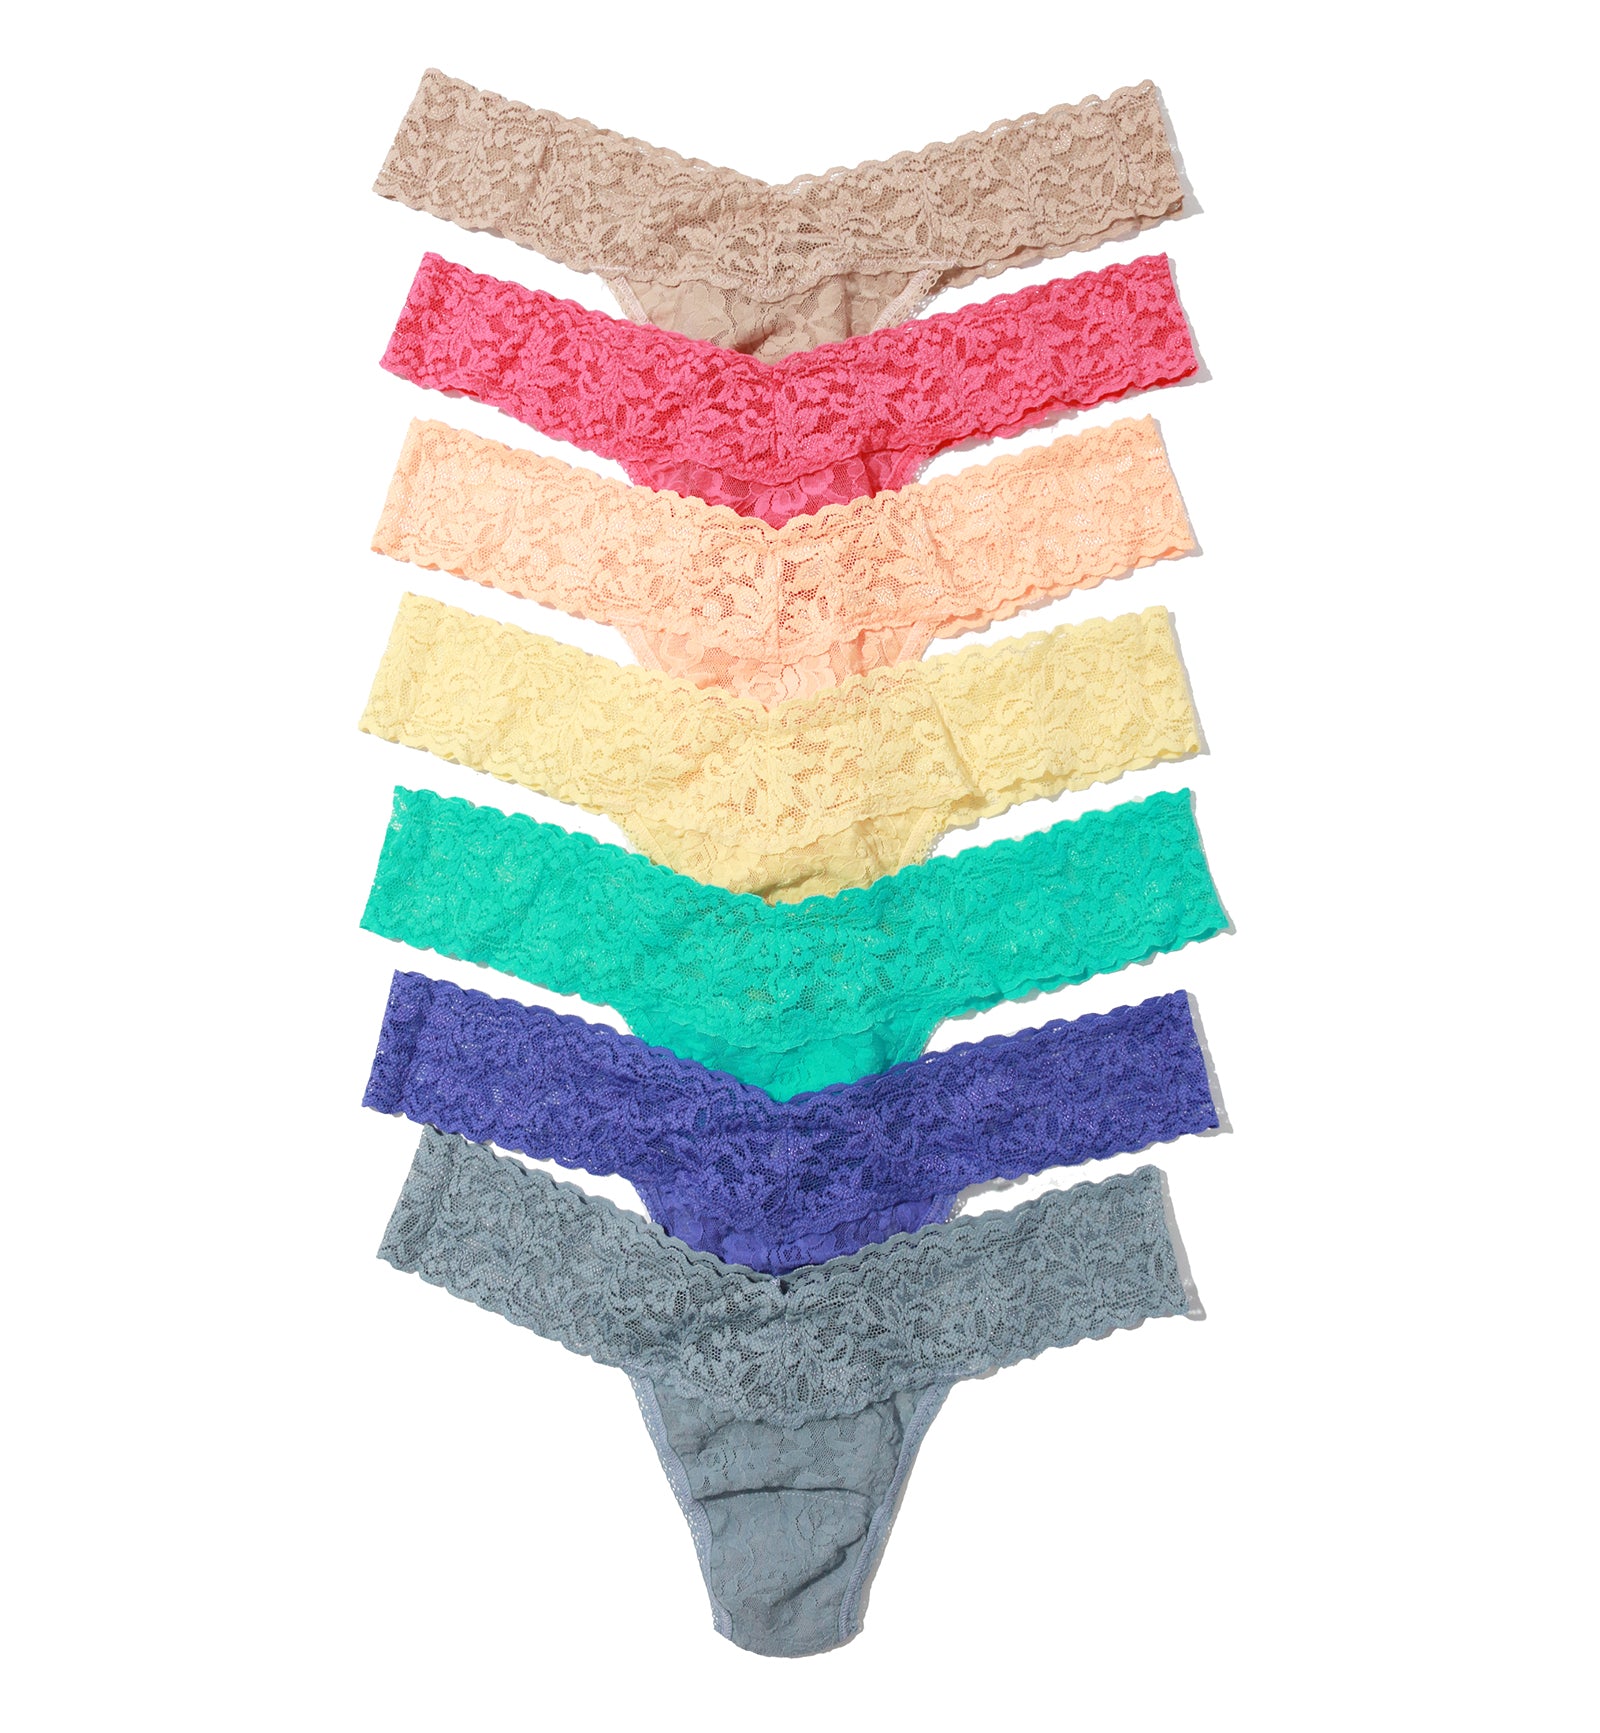 Hanky Panky Days of the Week 7-PACK Signature Lace Low Rise Thong (49117BX),7DOW - 7DOW,One Size